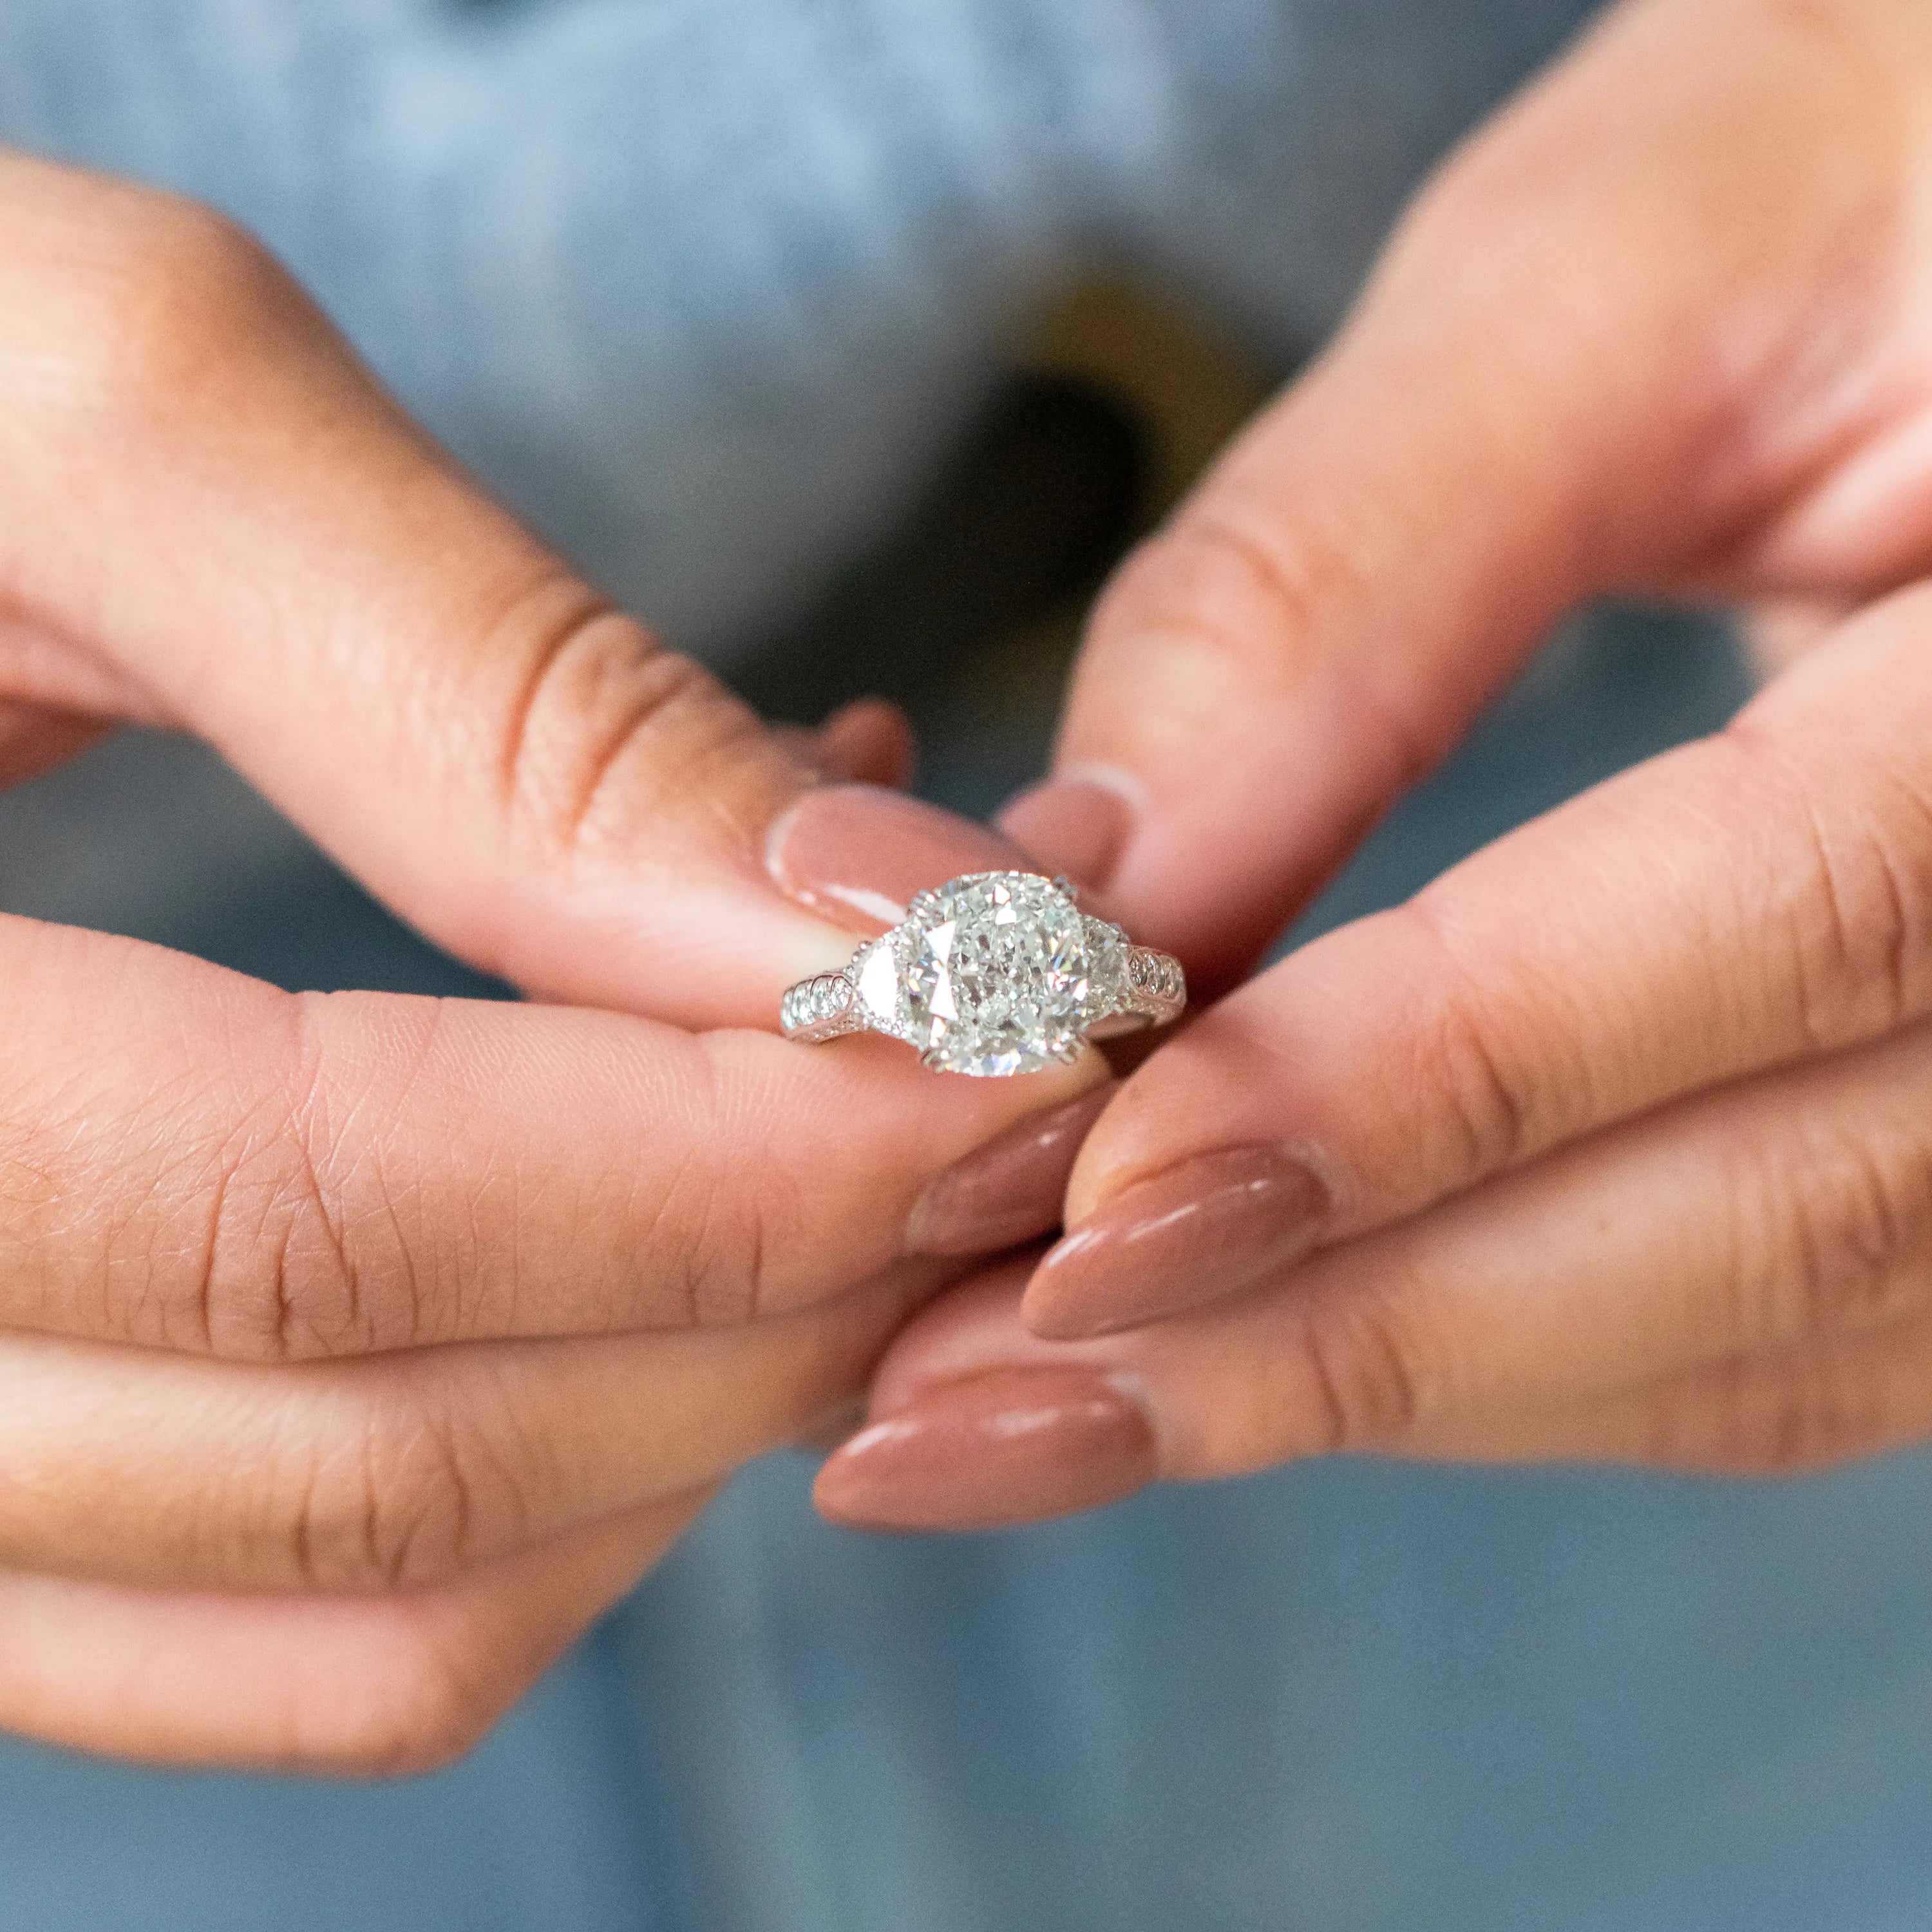 Things to Consider When Updating Your Engagement Ring